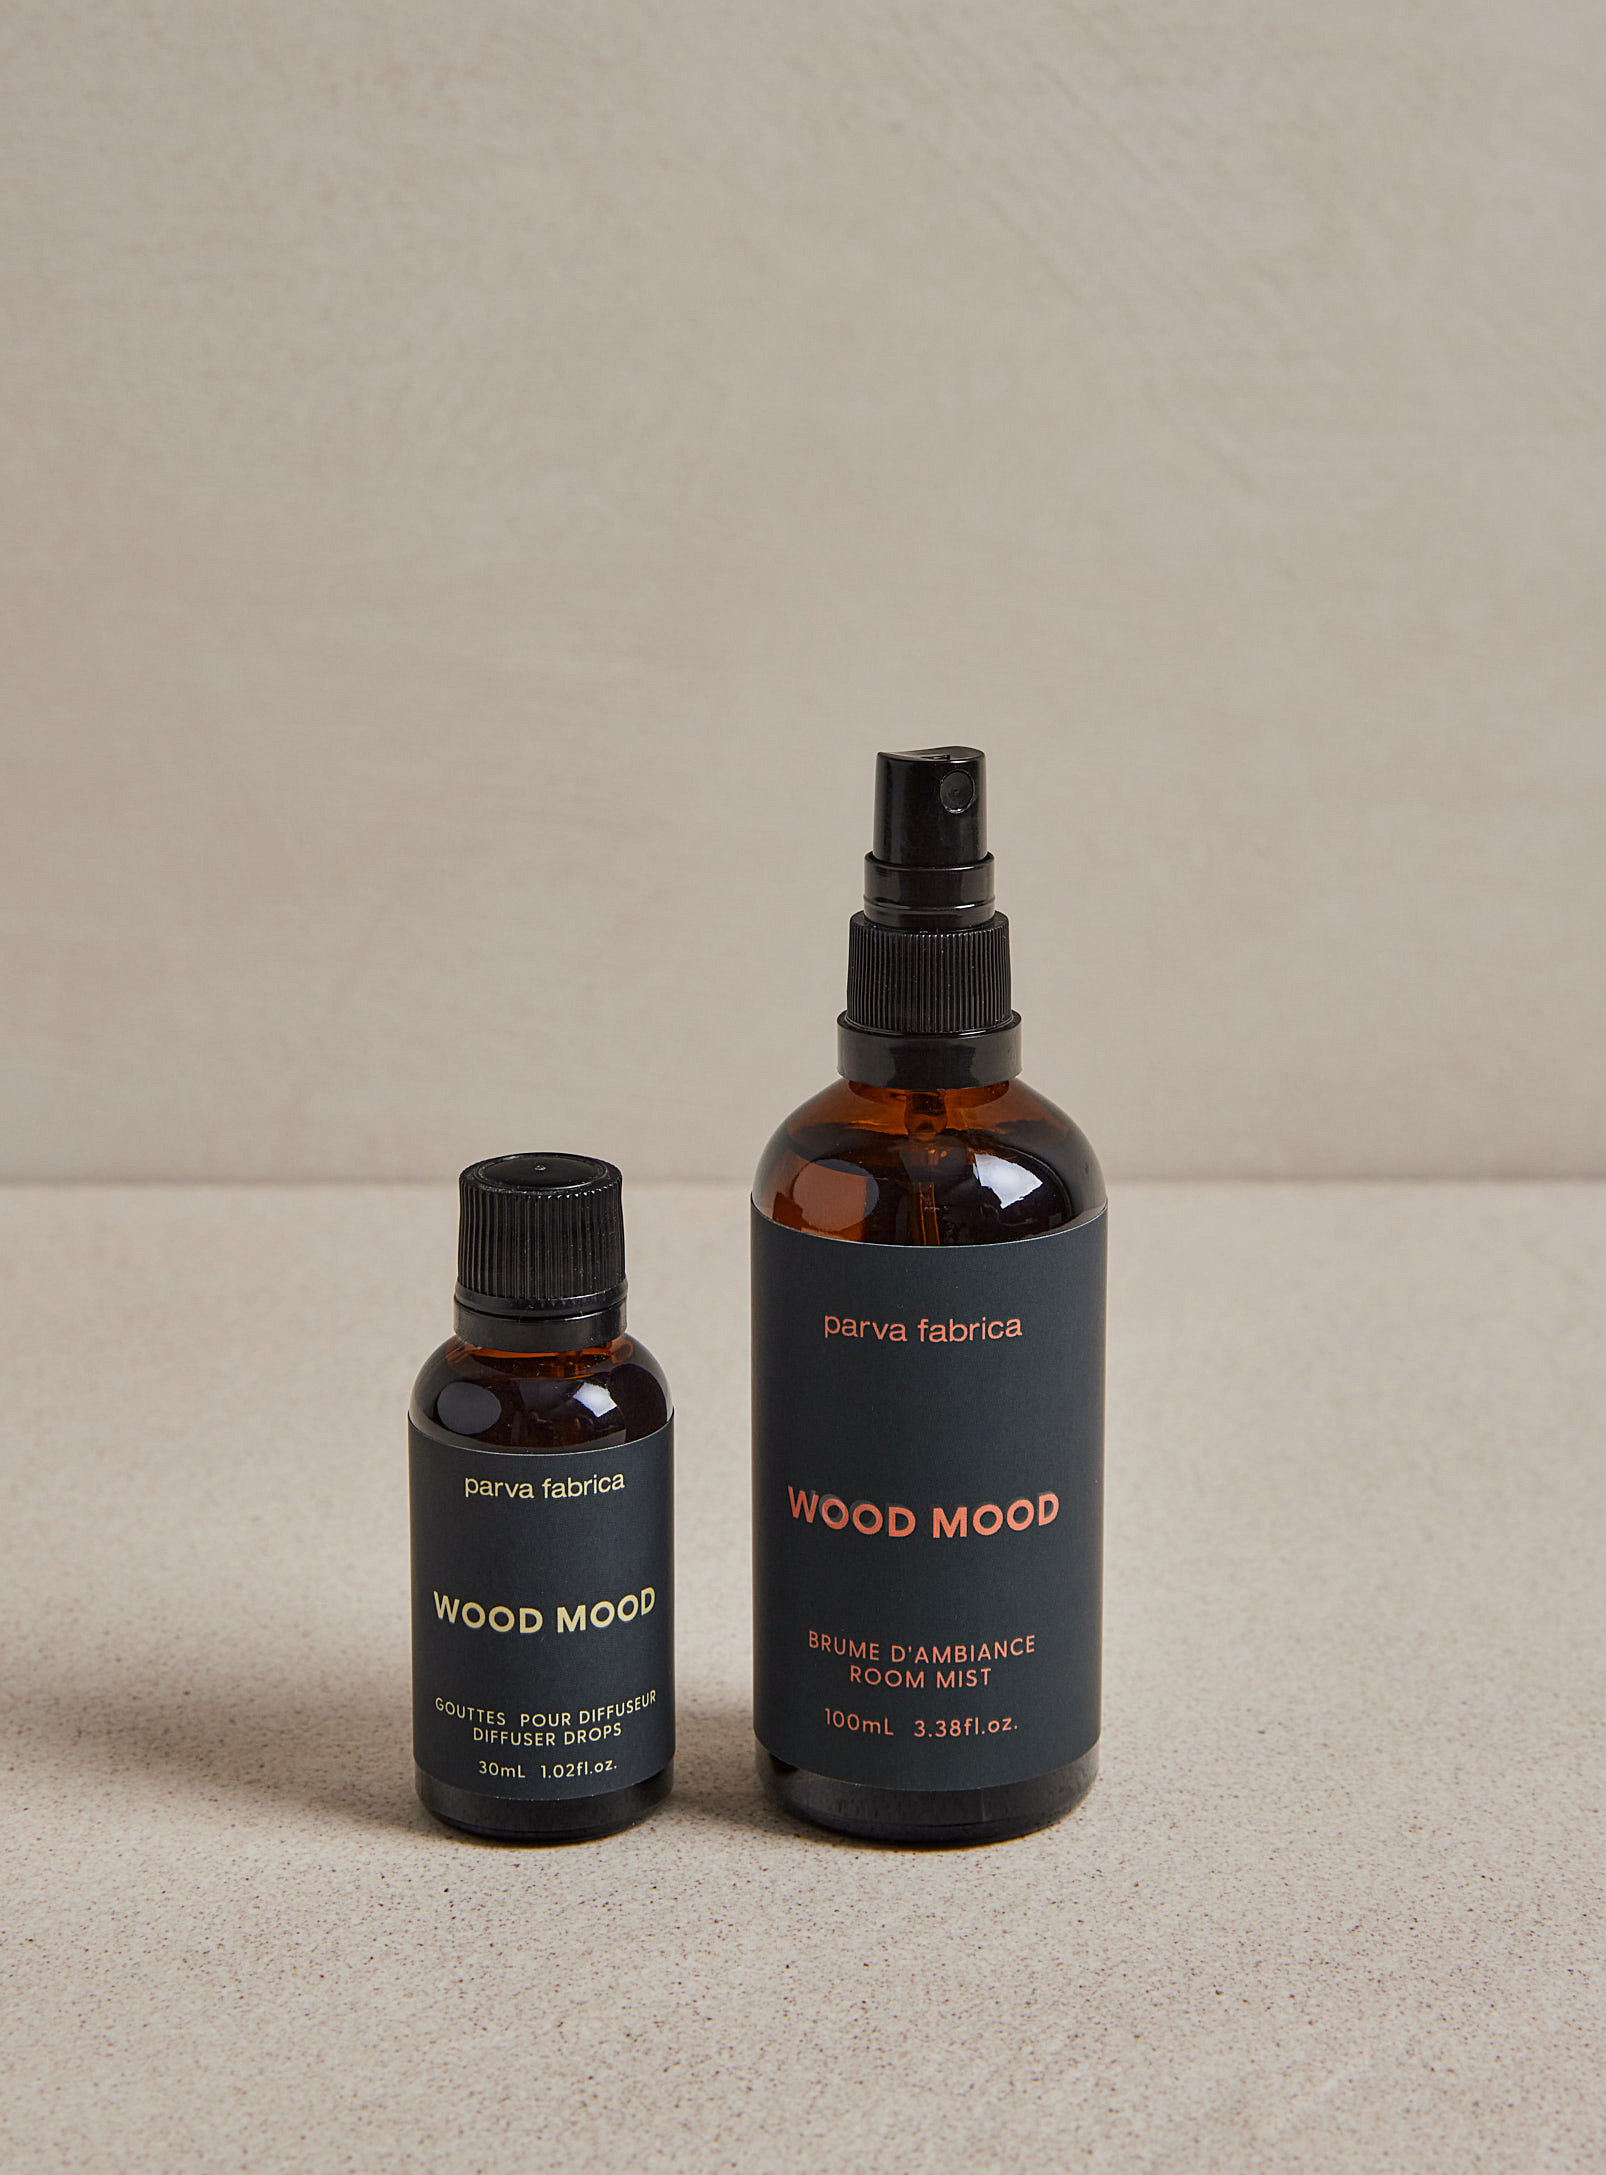 Parva Fabrica - Le duo d'ambiance Wood Mood